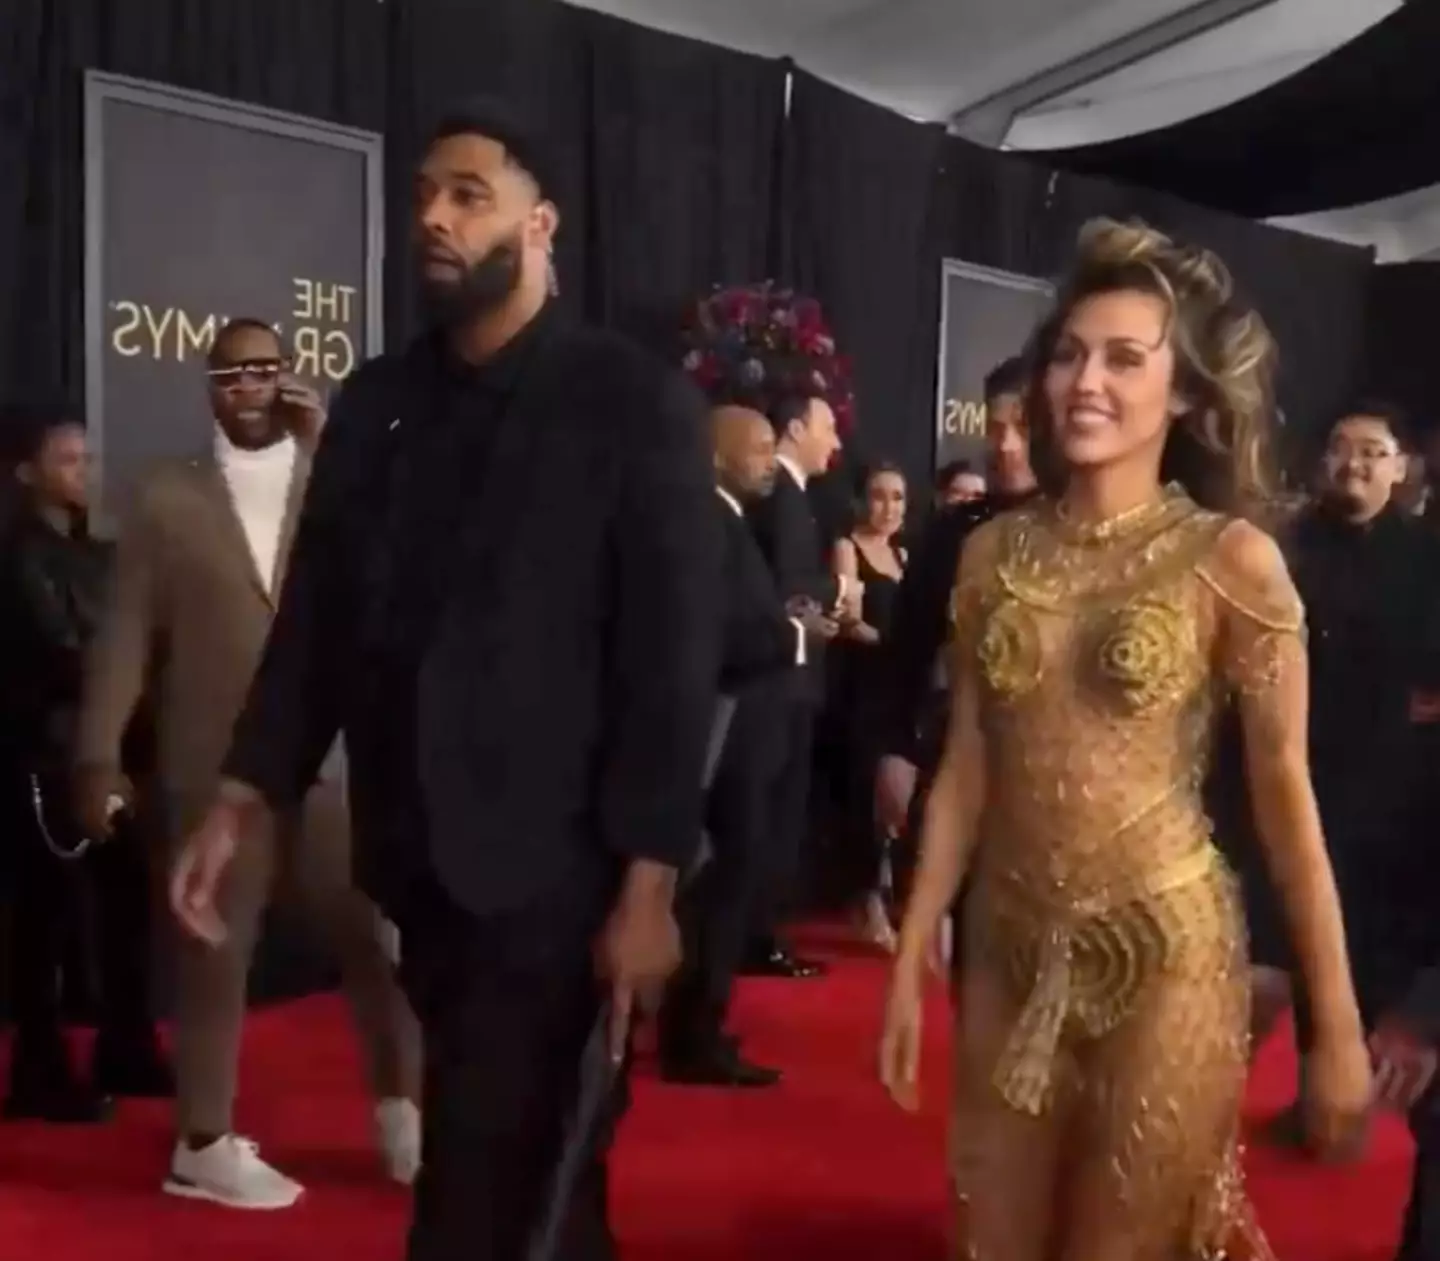 The clip shows Cyrus walking down the red carpet into the ceremony accompanied by her bodyguard who is holding an umbrella.